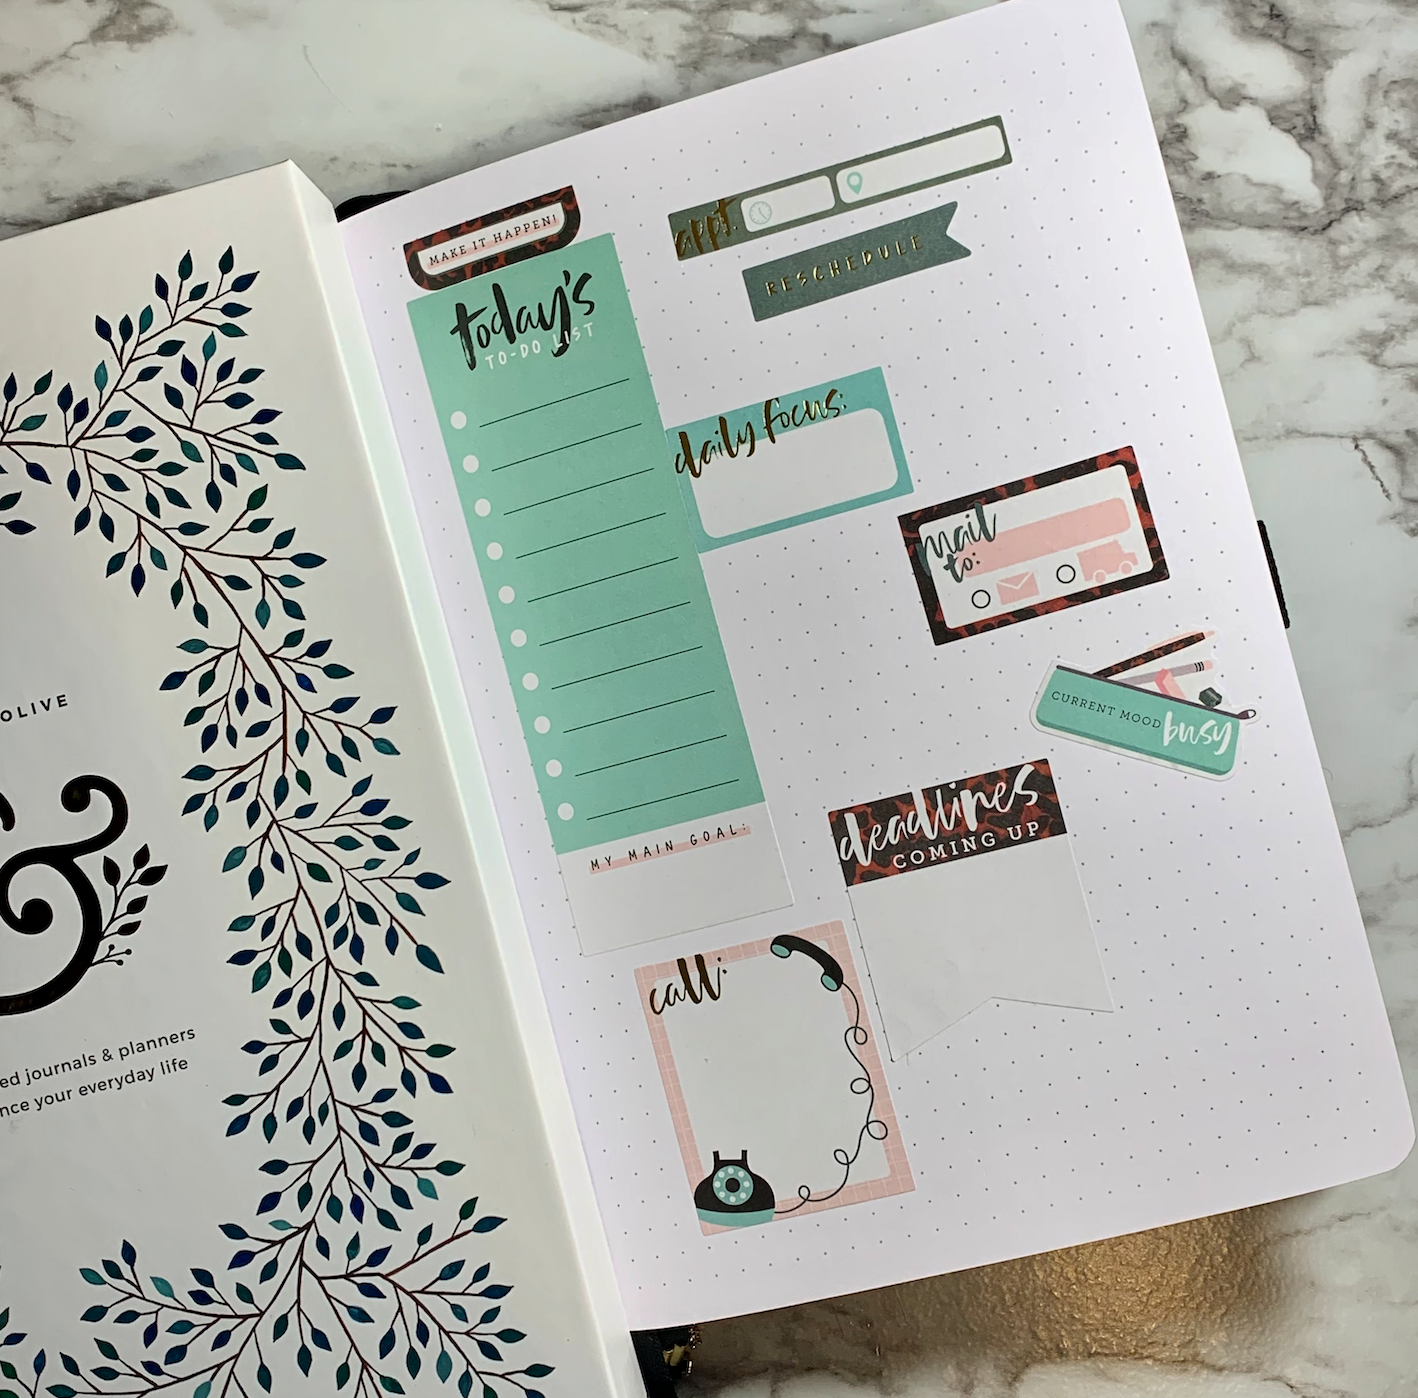 Soothing Bullet Journal Layouts to Inspire Your Creativity